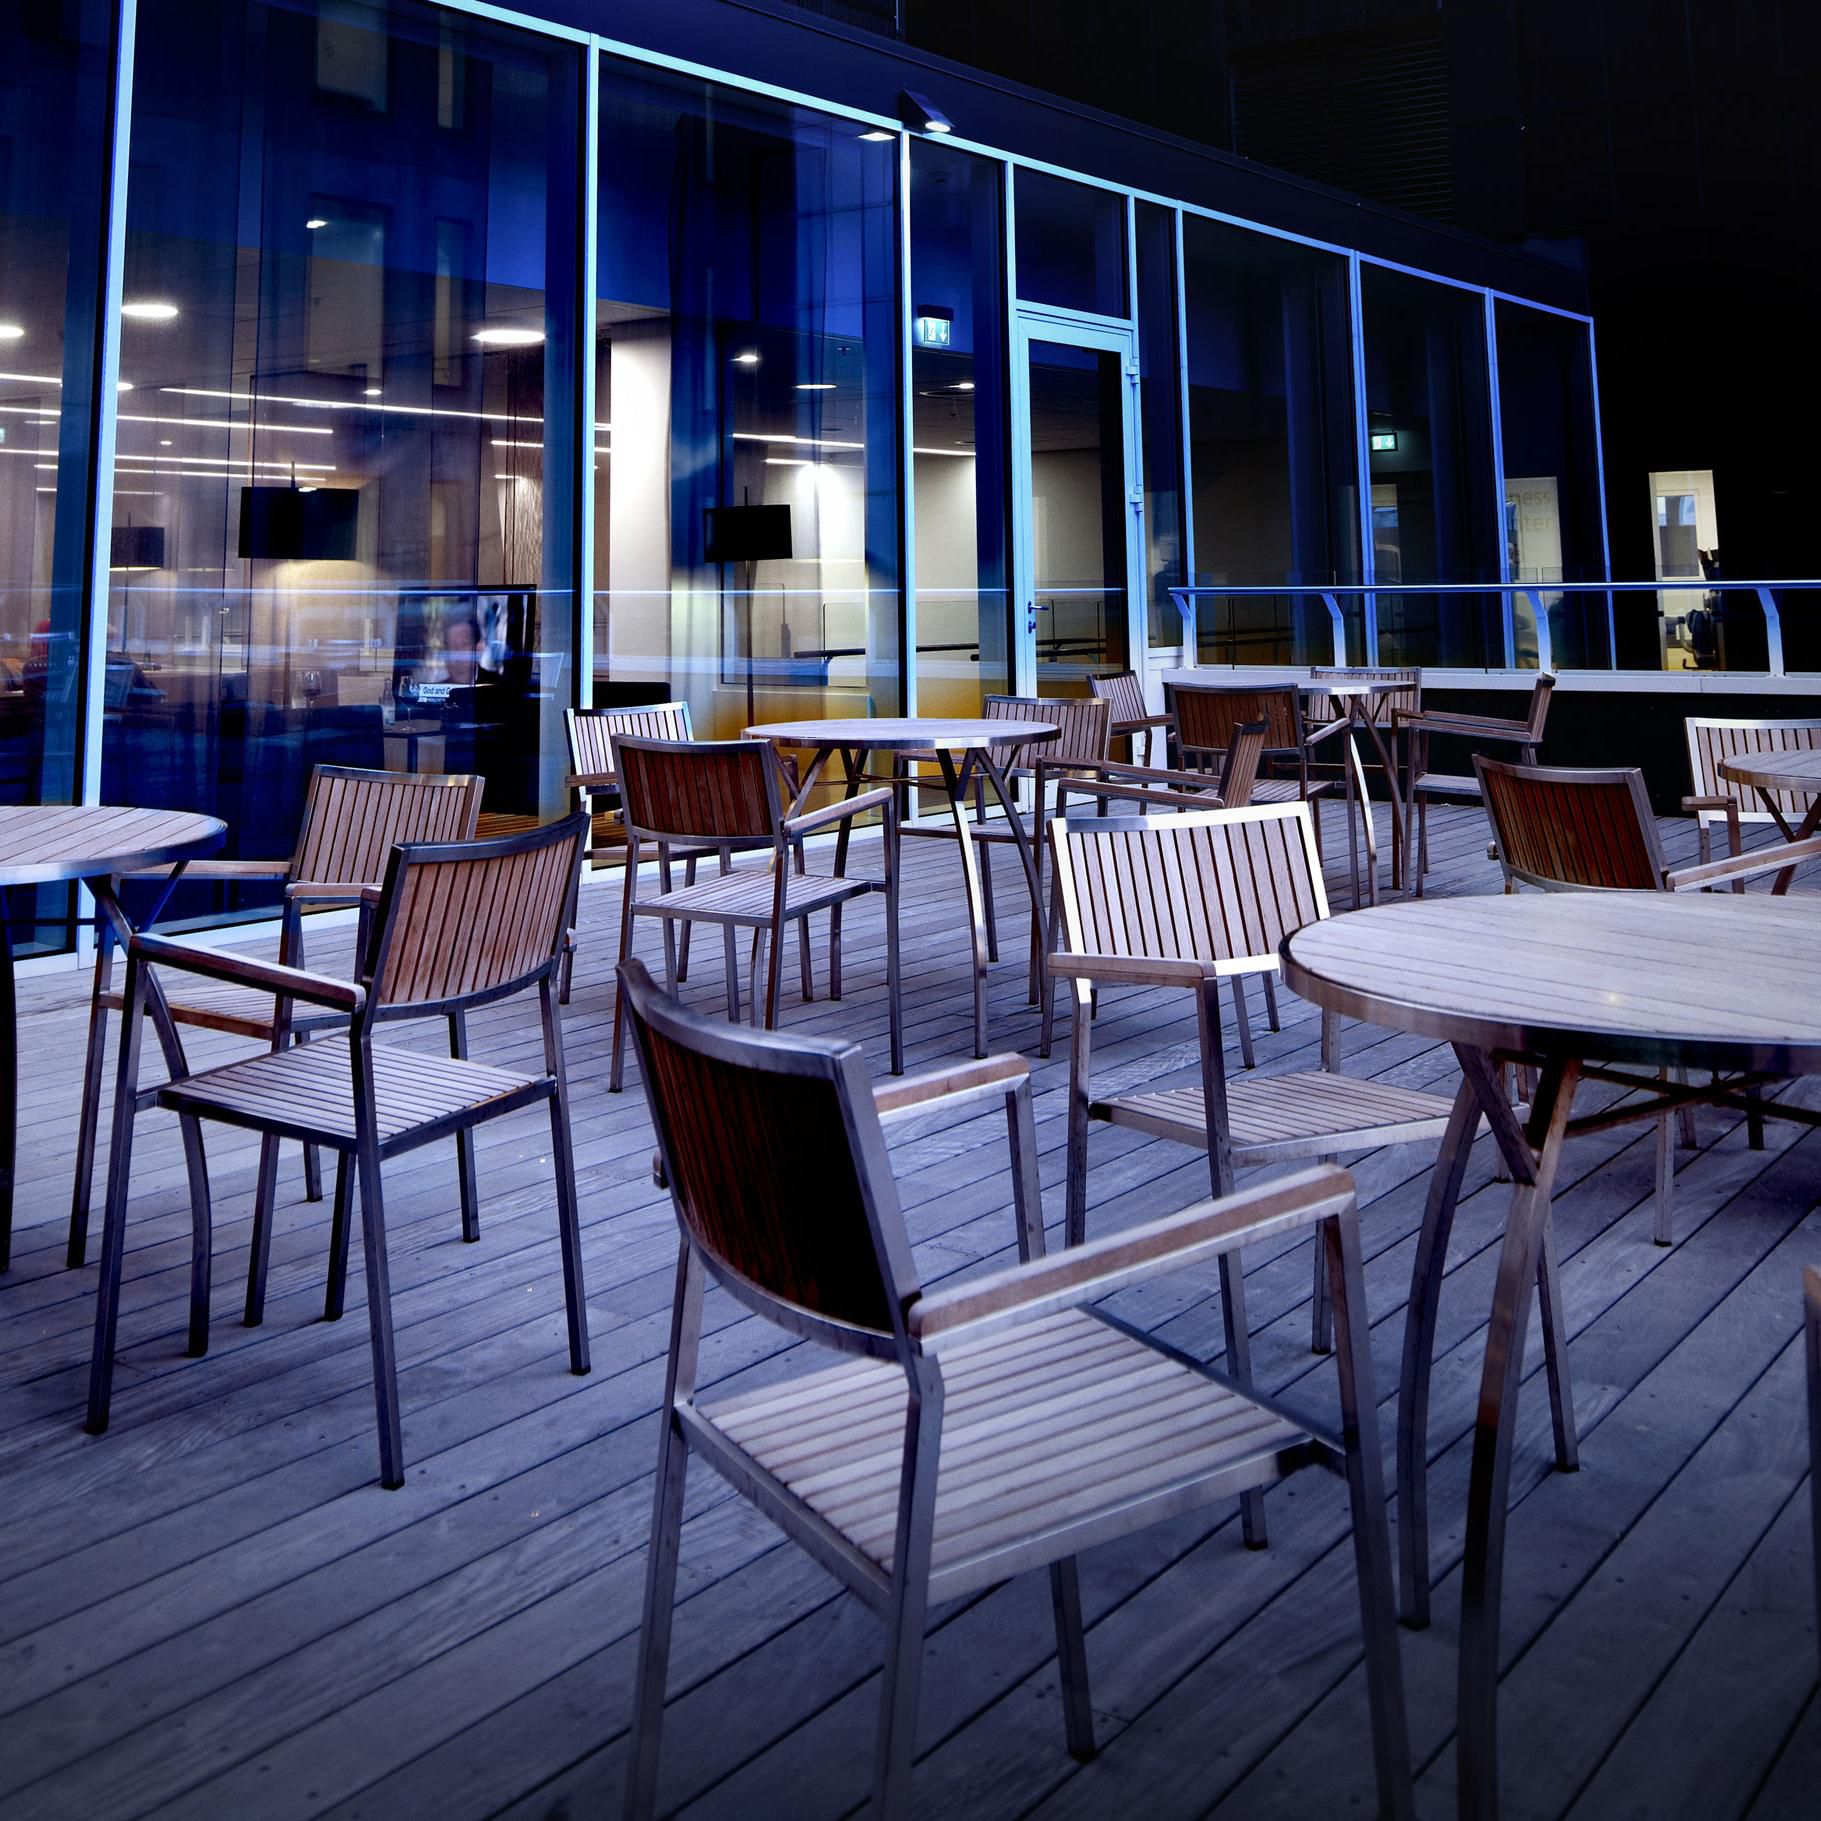 The terrasse is situated right next to the club lounge